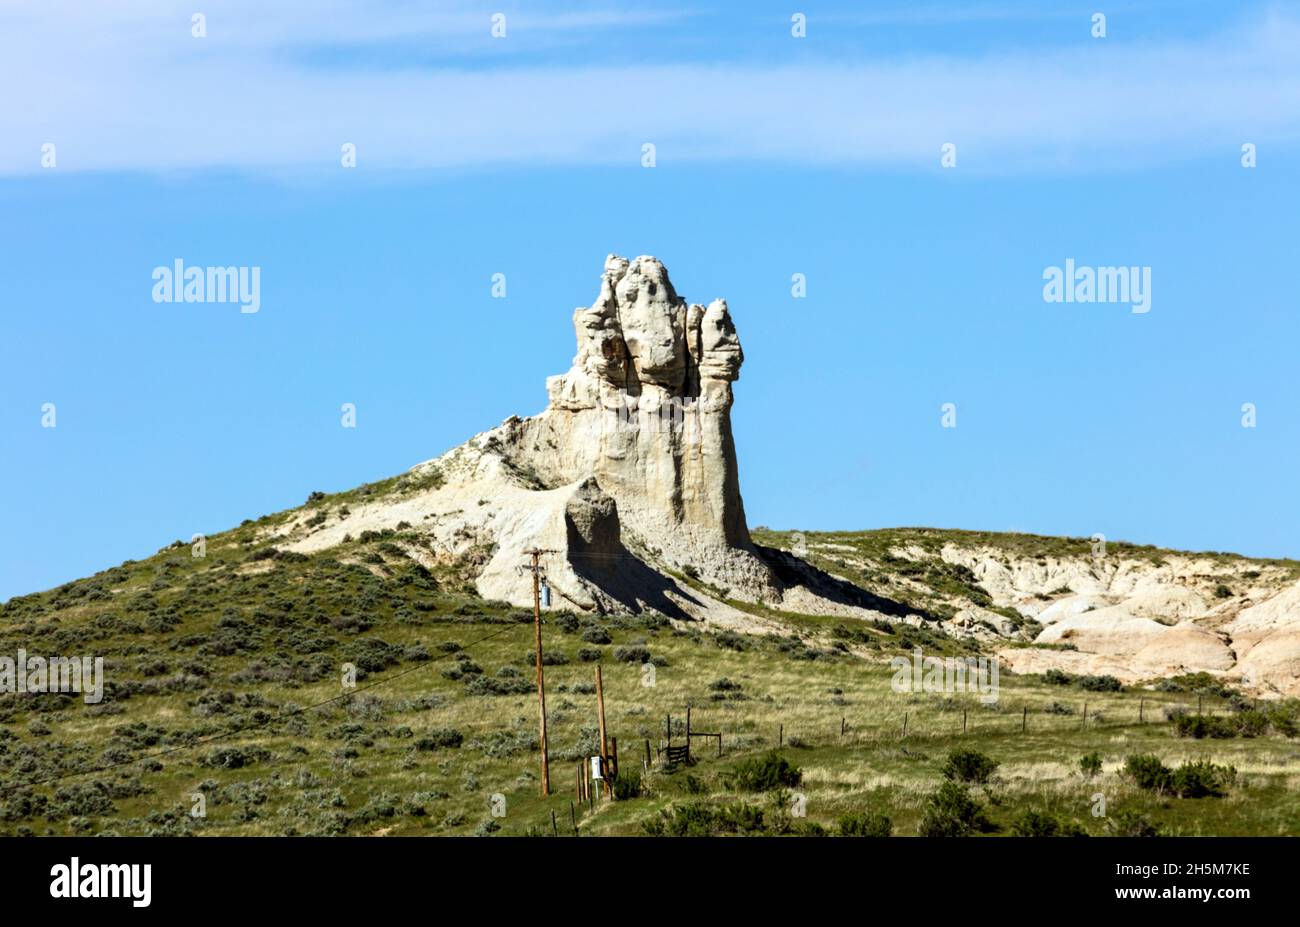 Teapot Rock, a distinctive sedimentary rock formation in Natrona County, Wyoming. Original image from Carol M. Highsmith’s America, Library of Congres Stock Photo